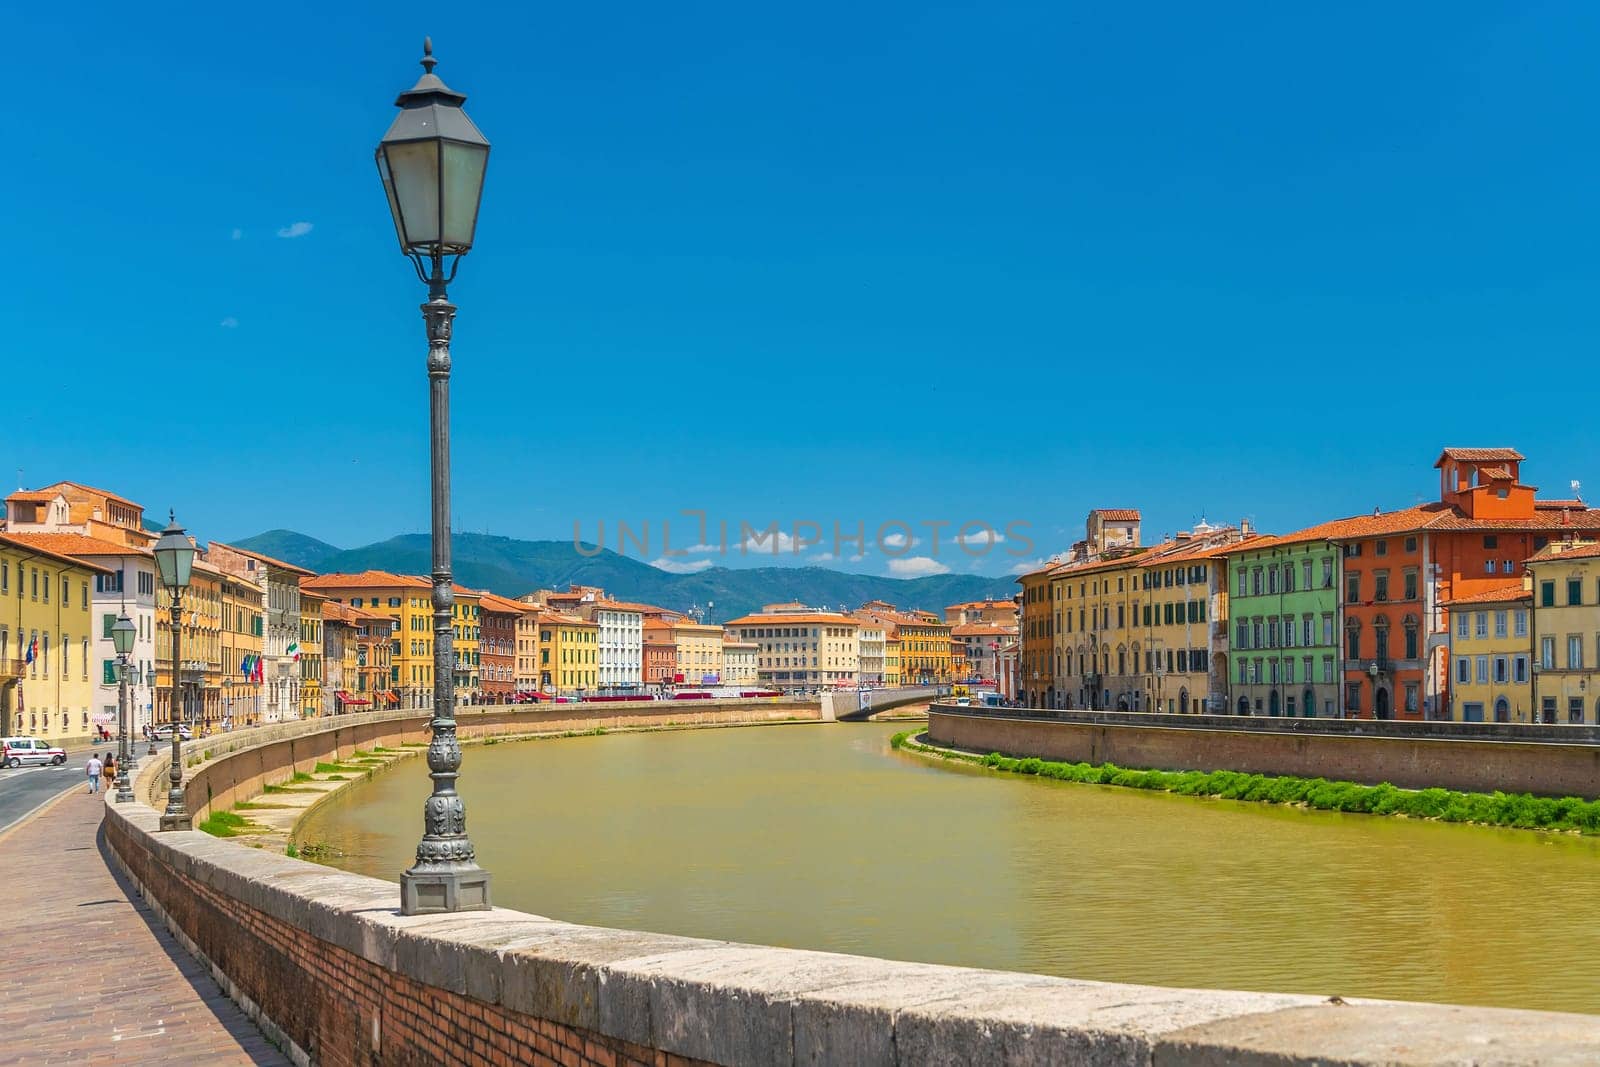 View of the medieval town of Pisa and river Arno  by f11photo